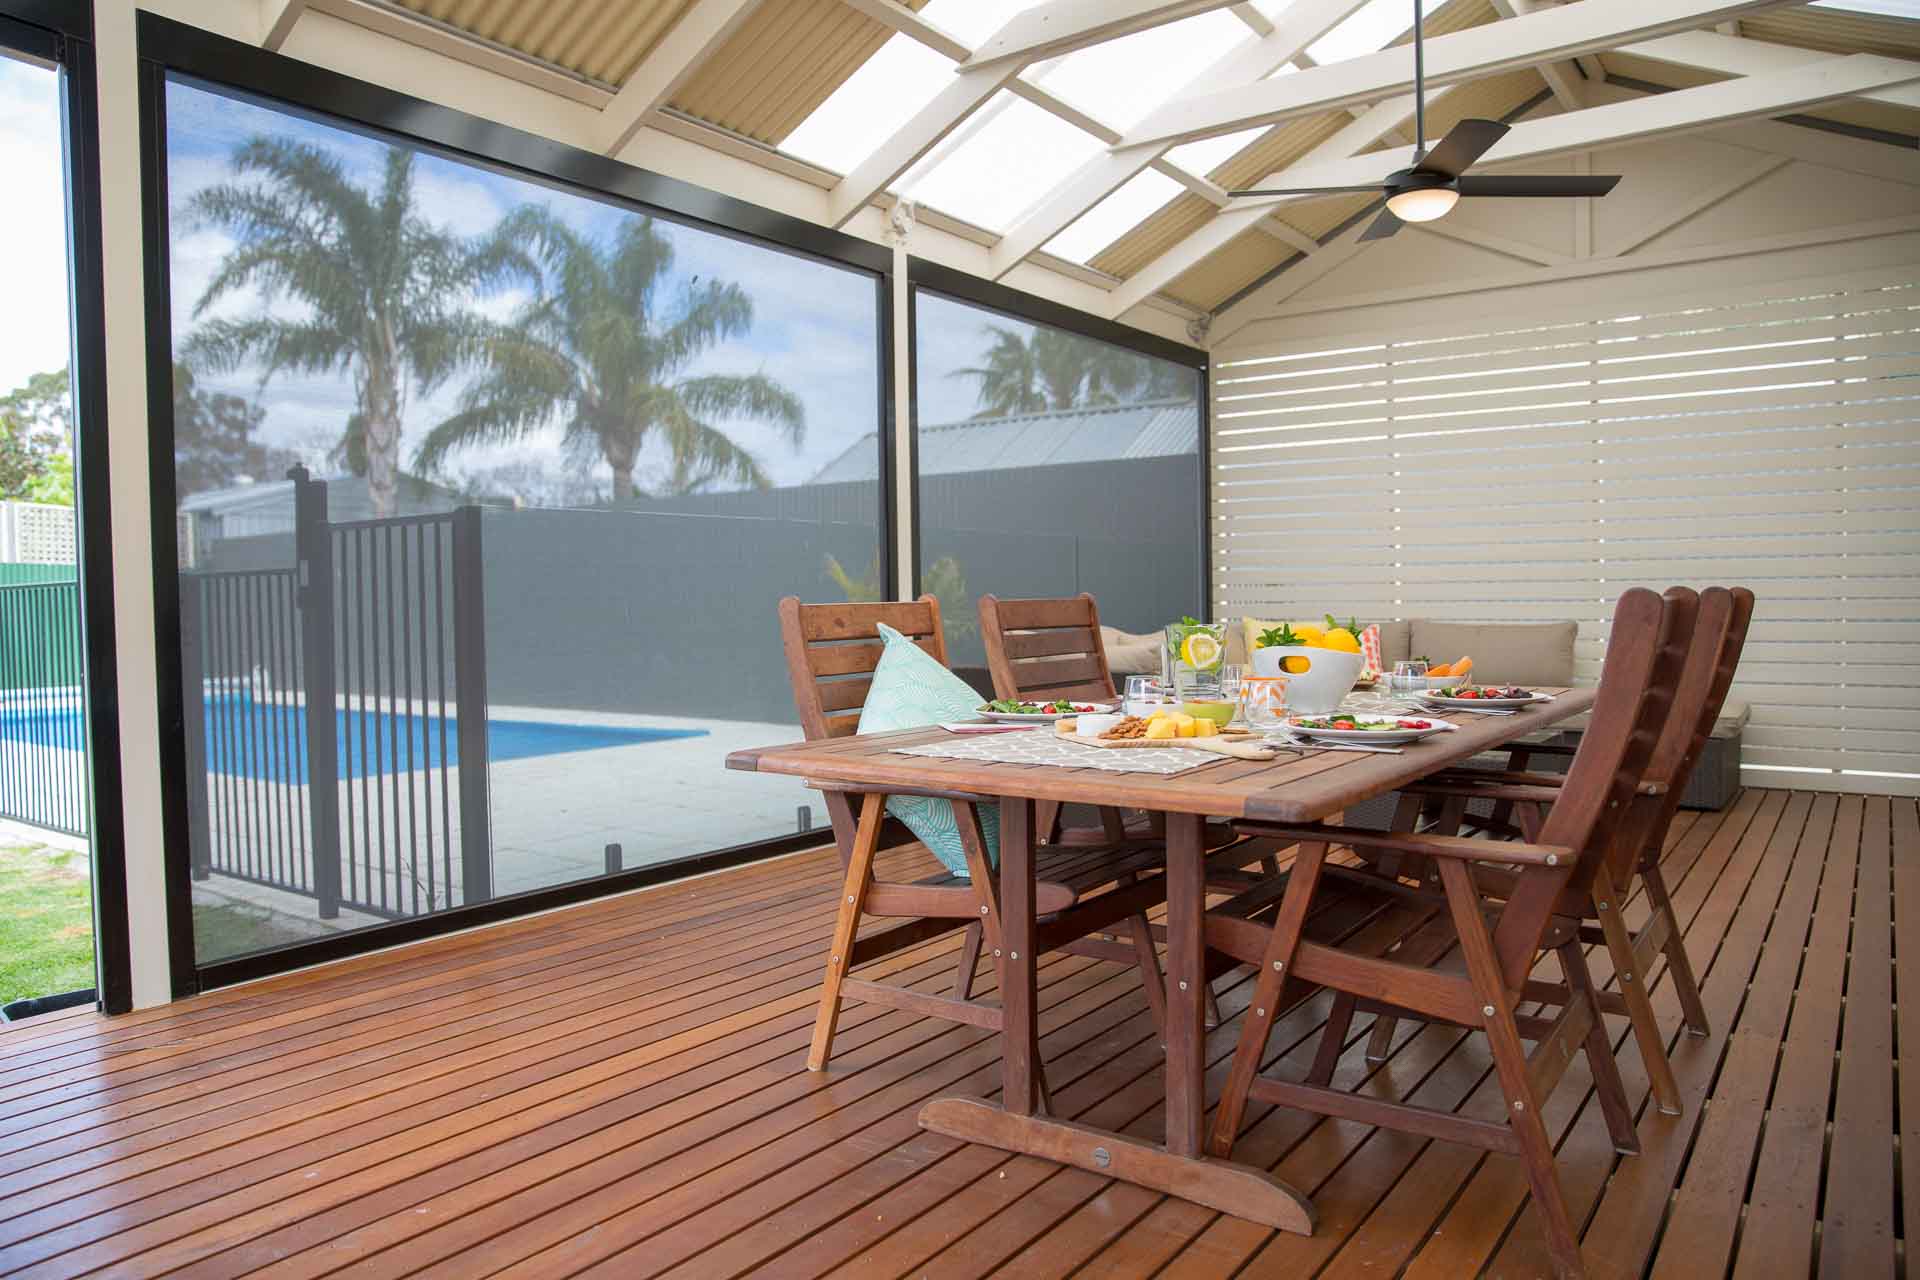 How to create the ultimate BBQ area - Build a timber deck, Australian Outdoor Living.